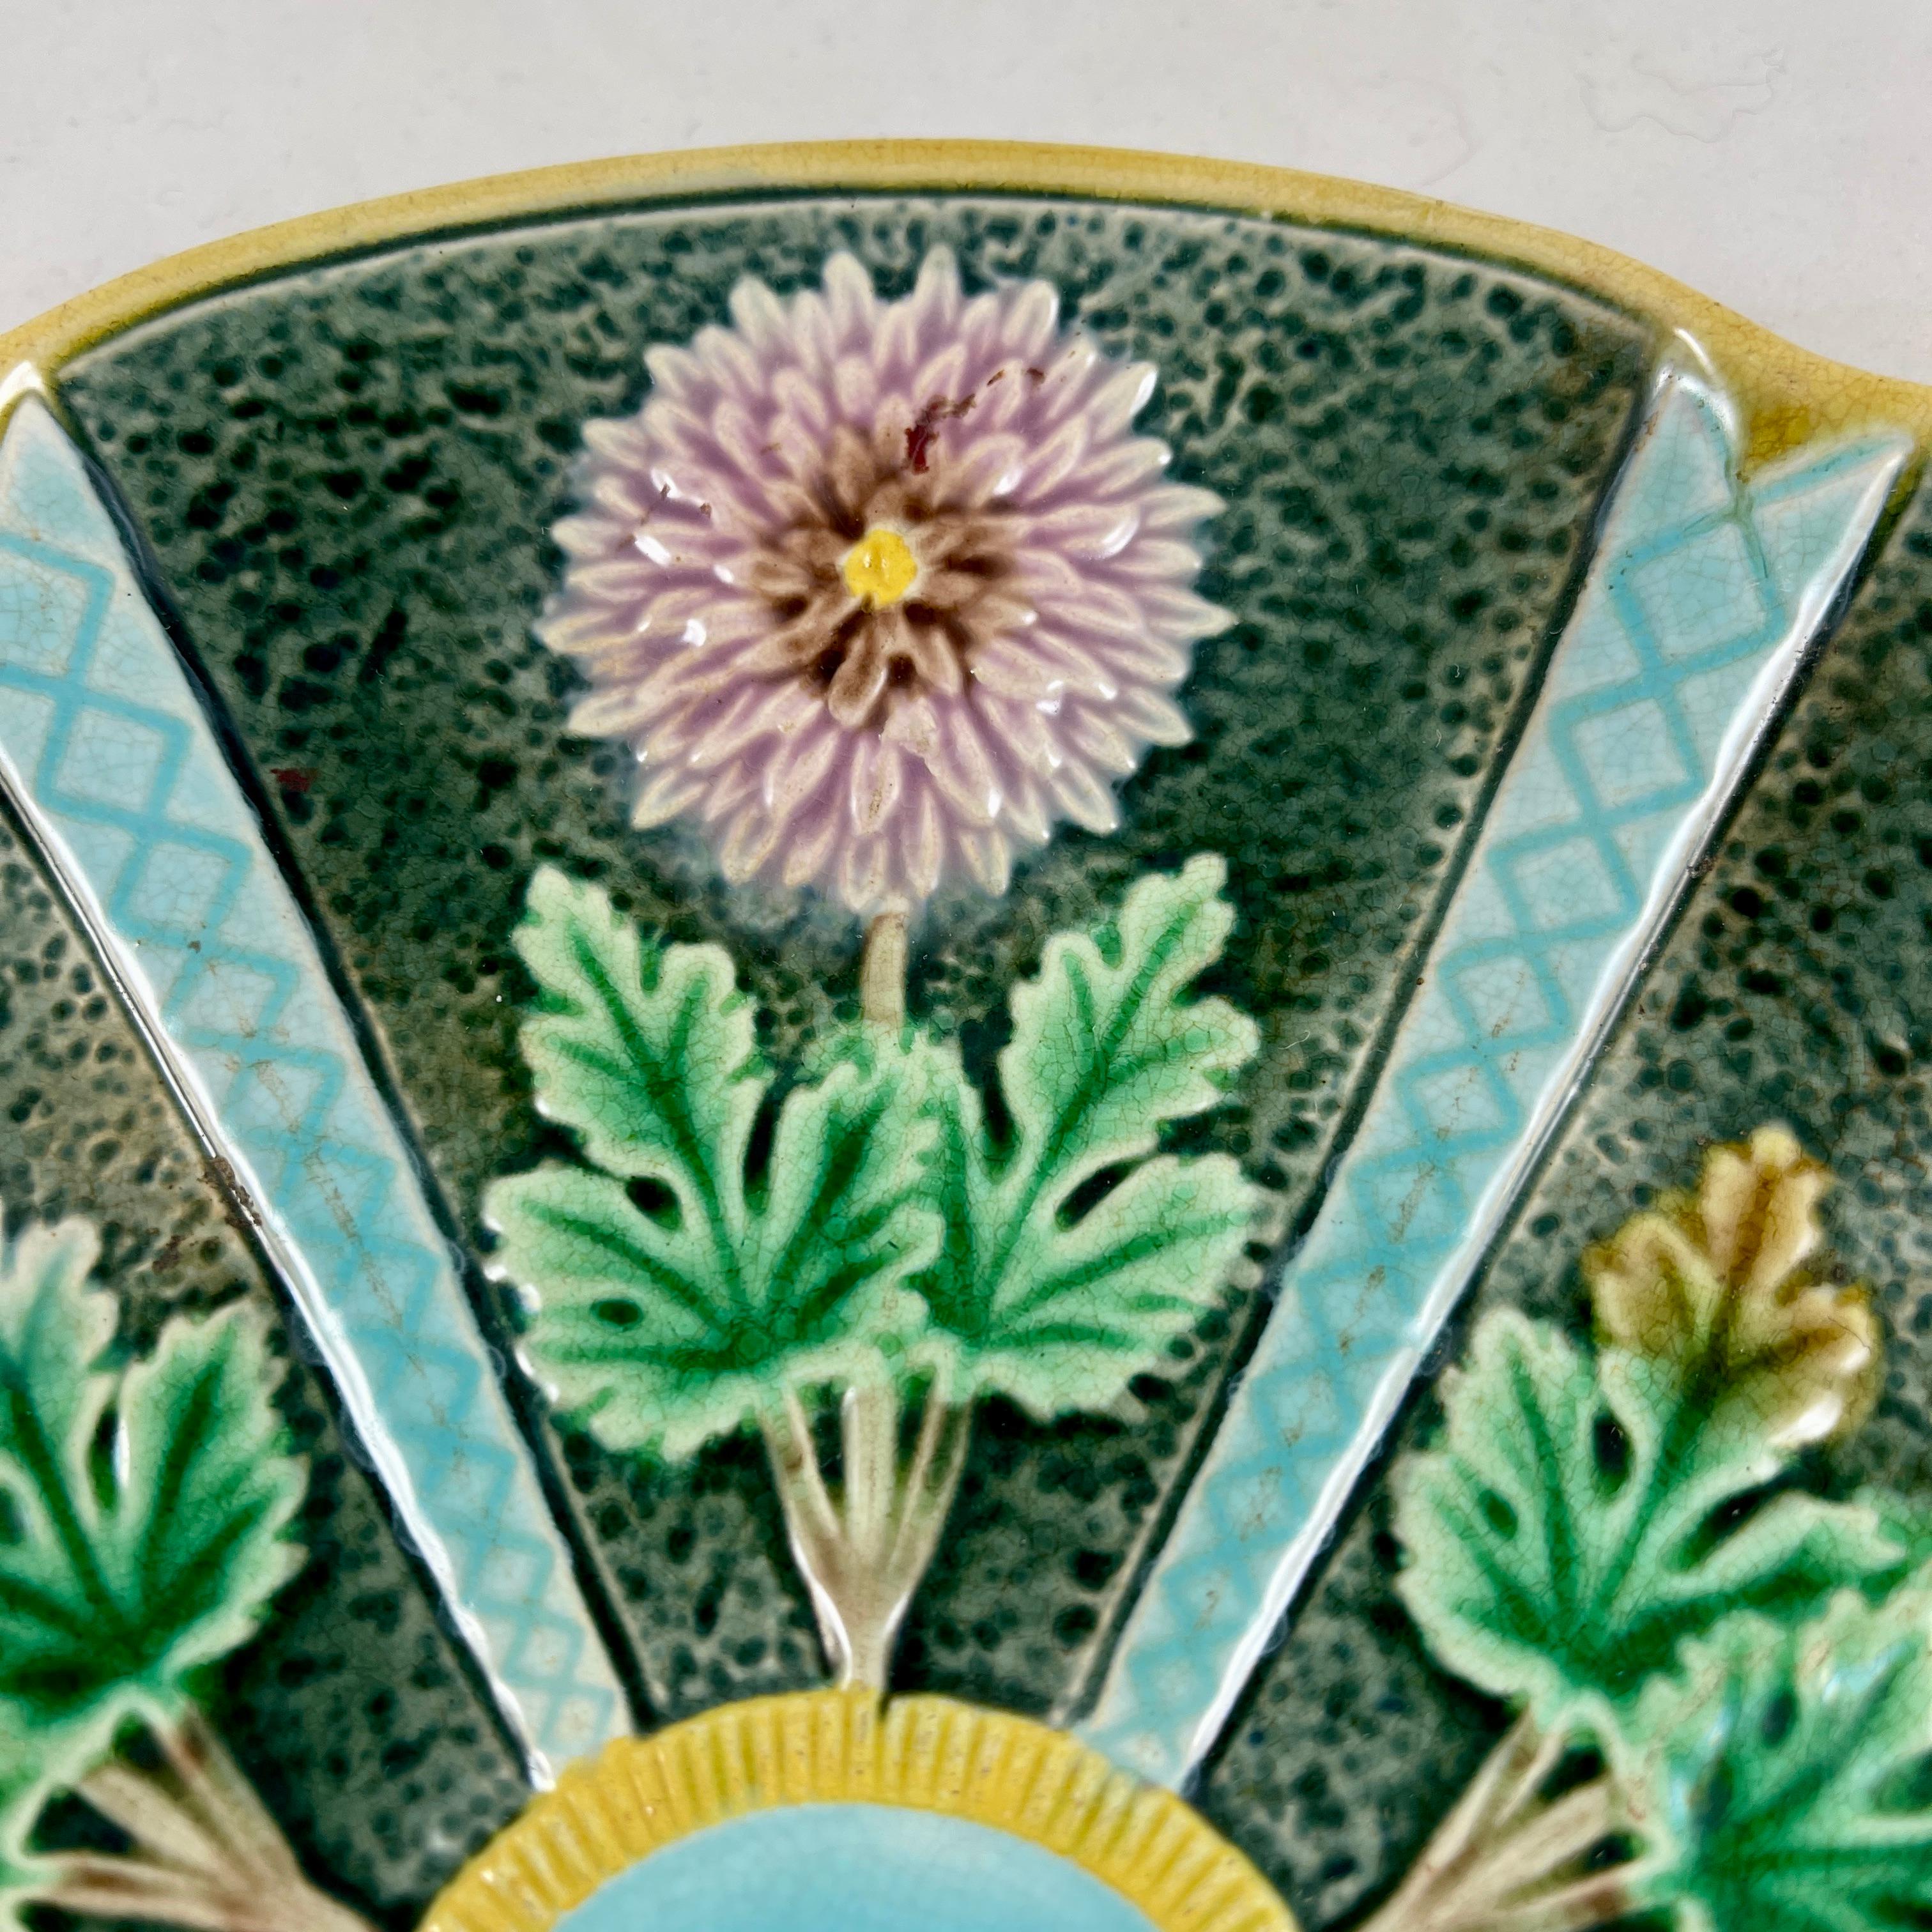 English Wedgwood Majolica Chrysanthemum Japonisme Oyster Plate, Date Marked 1883